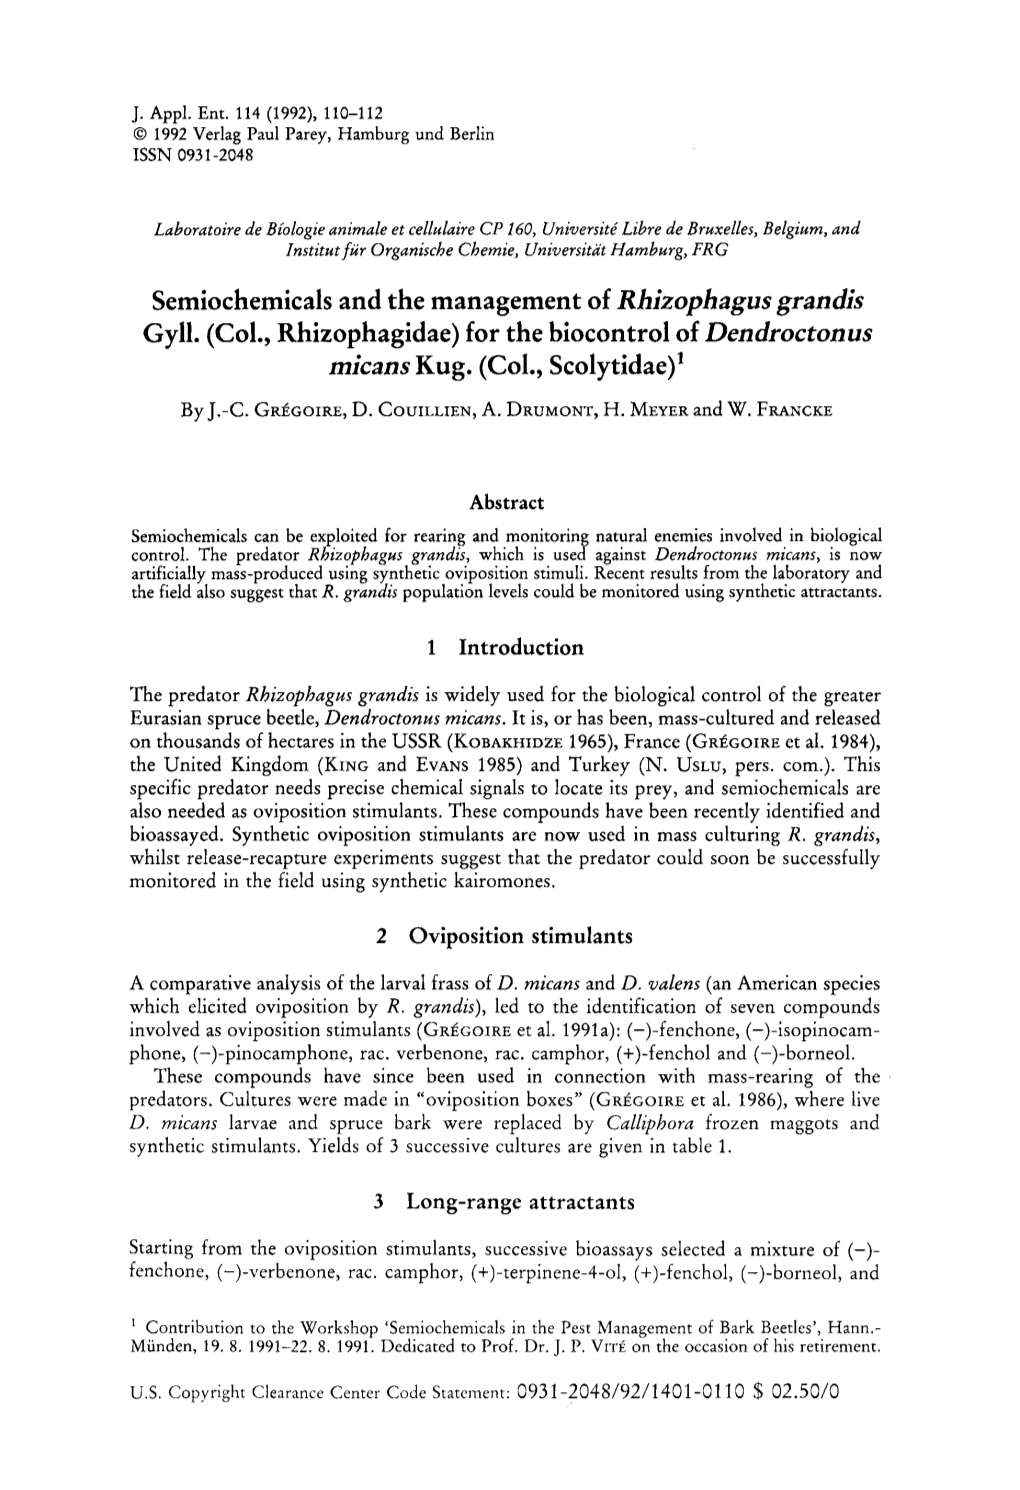 Semiochemicals and the Management of Rhizophagus Grandis Gyll. (Col., Rhizophagidae) for the Biocontrol of Dendroctonus Micans Kug